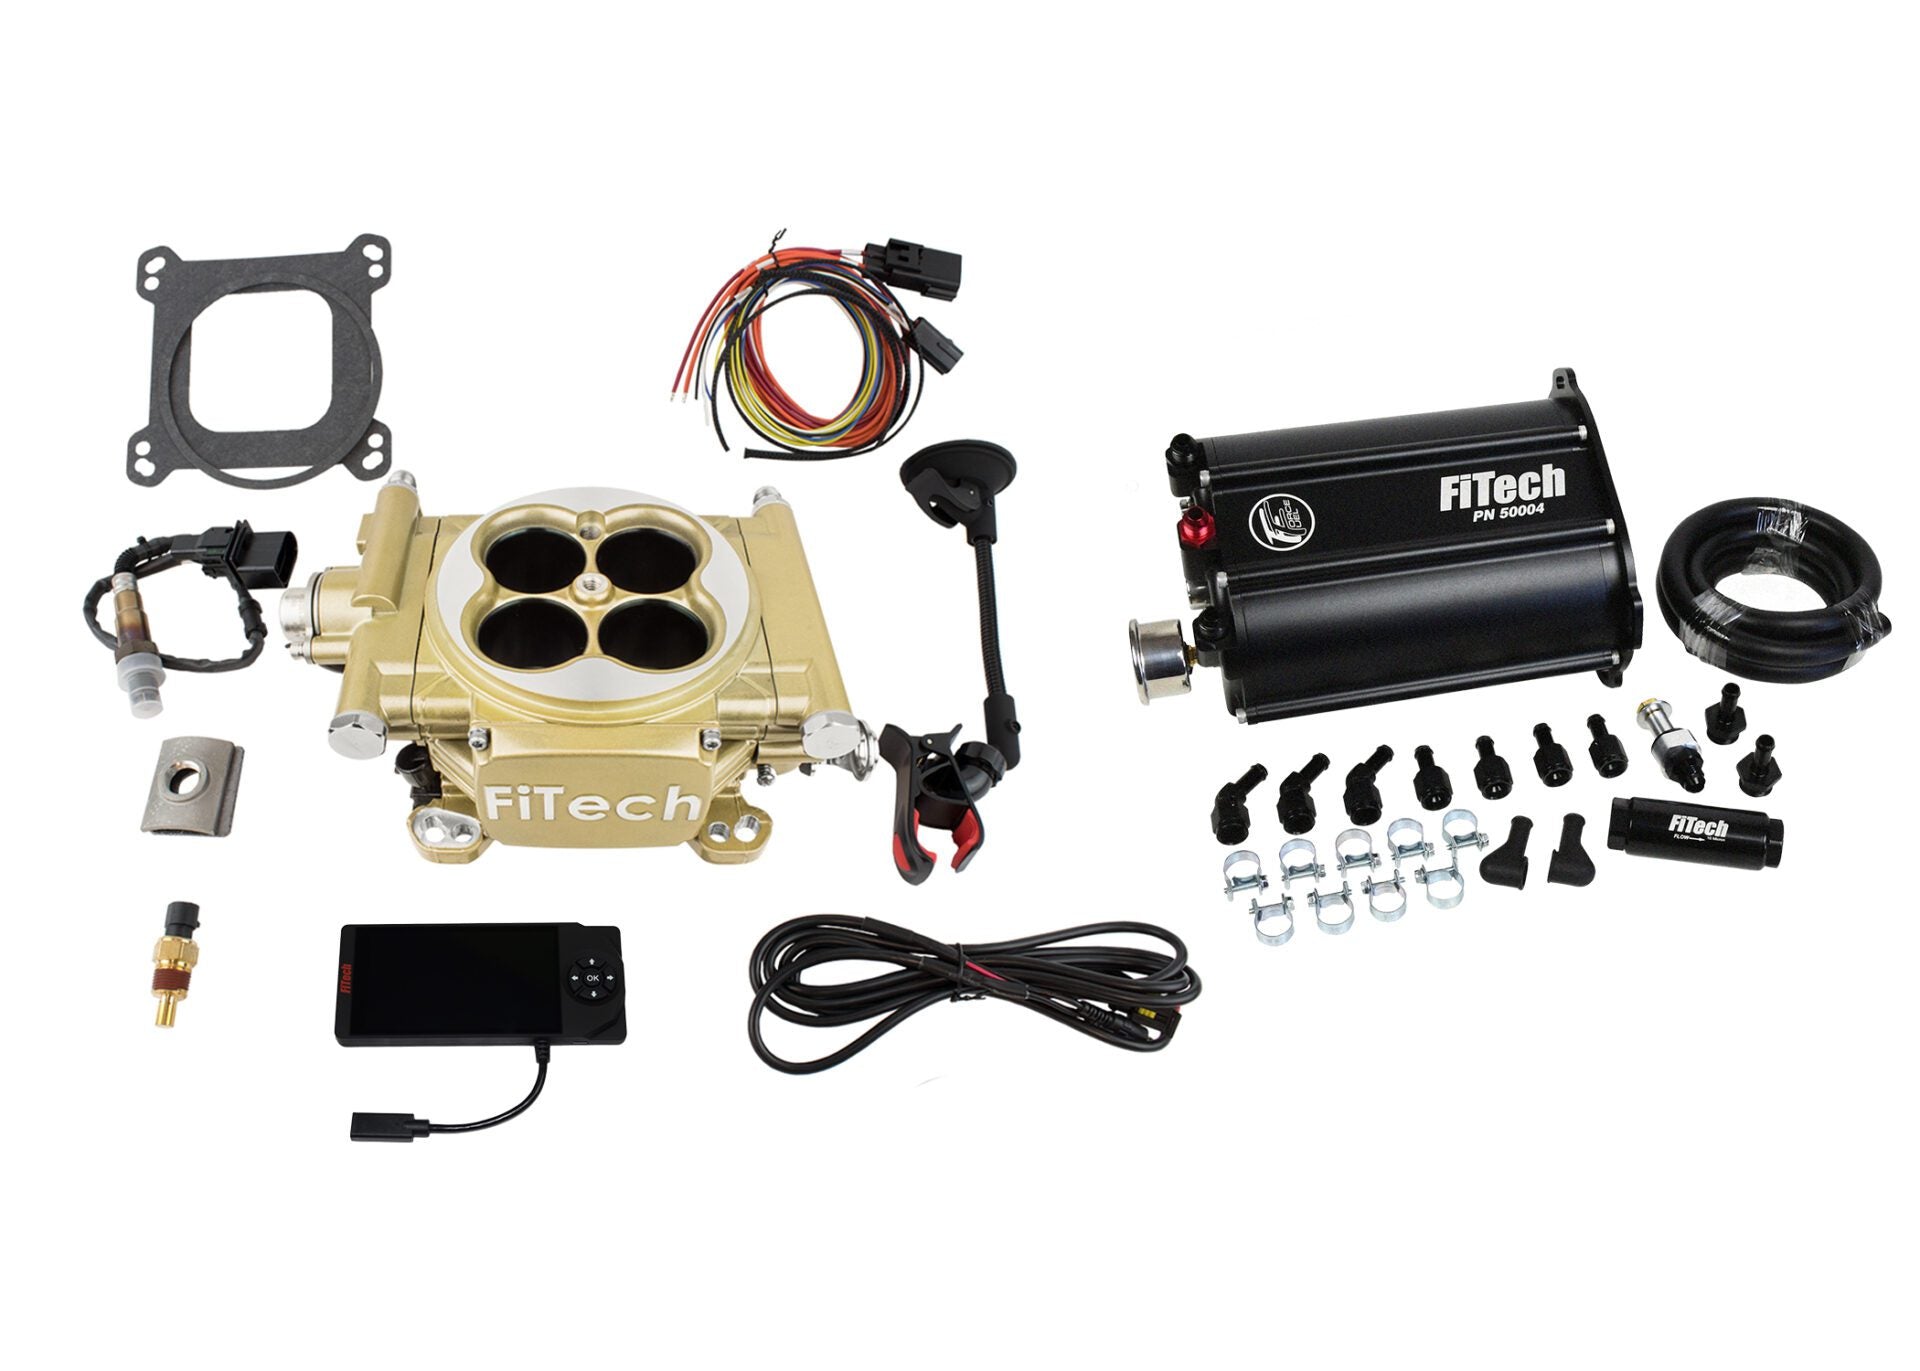 FiTech 35205 Easy Street Master Kit w/ Force Fuel, Fuel Delivery System